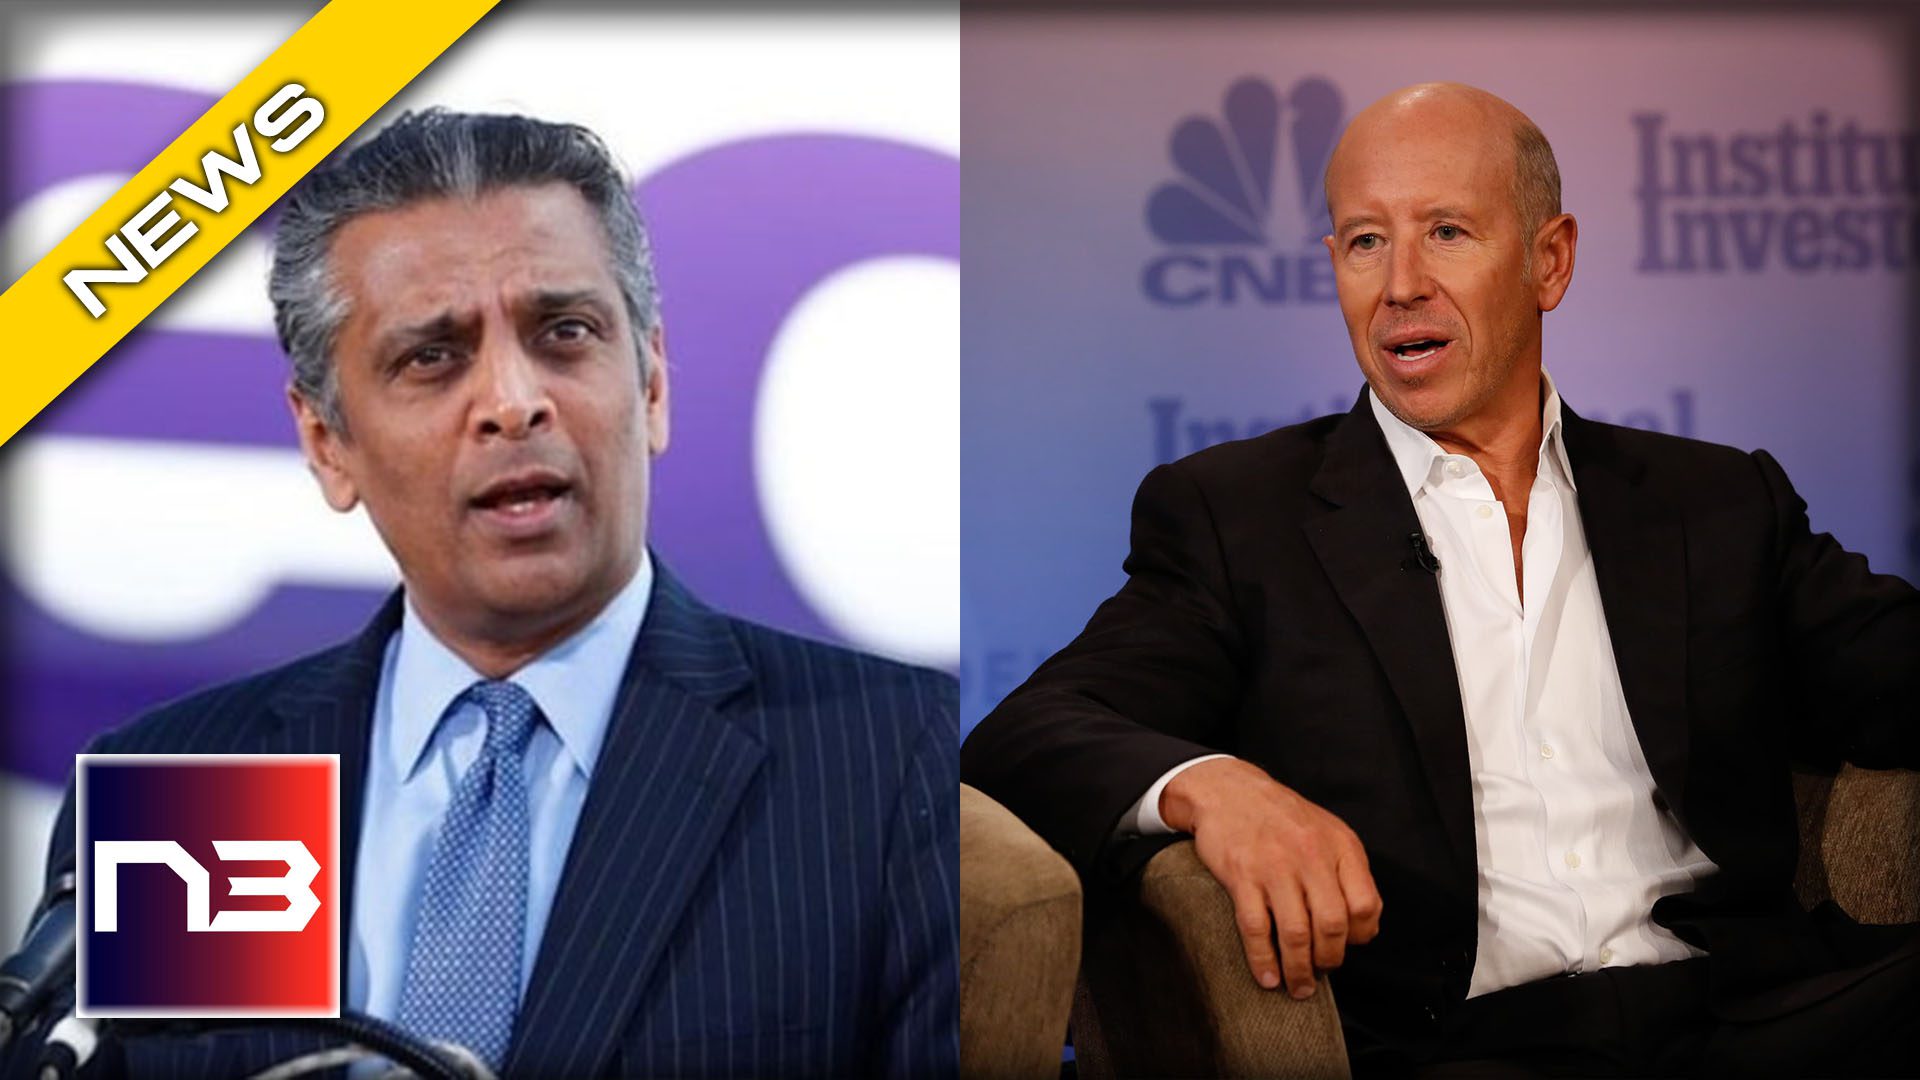 URGENT: Two Major CEO’s just Sounded the ALARM on Our Economy